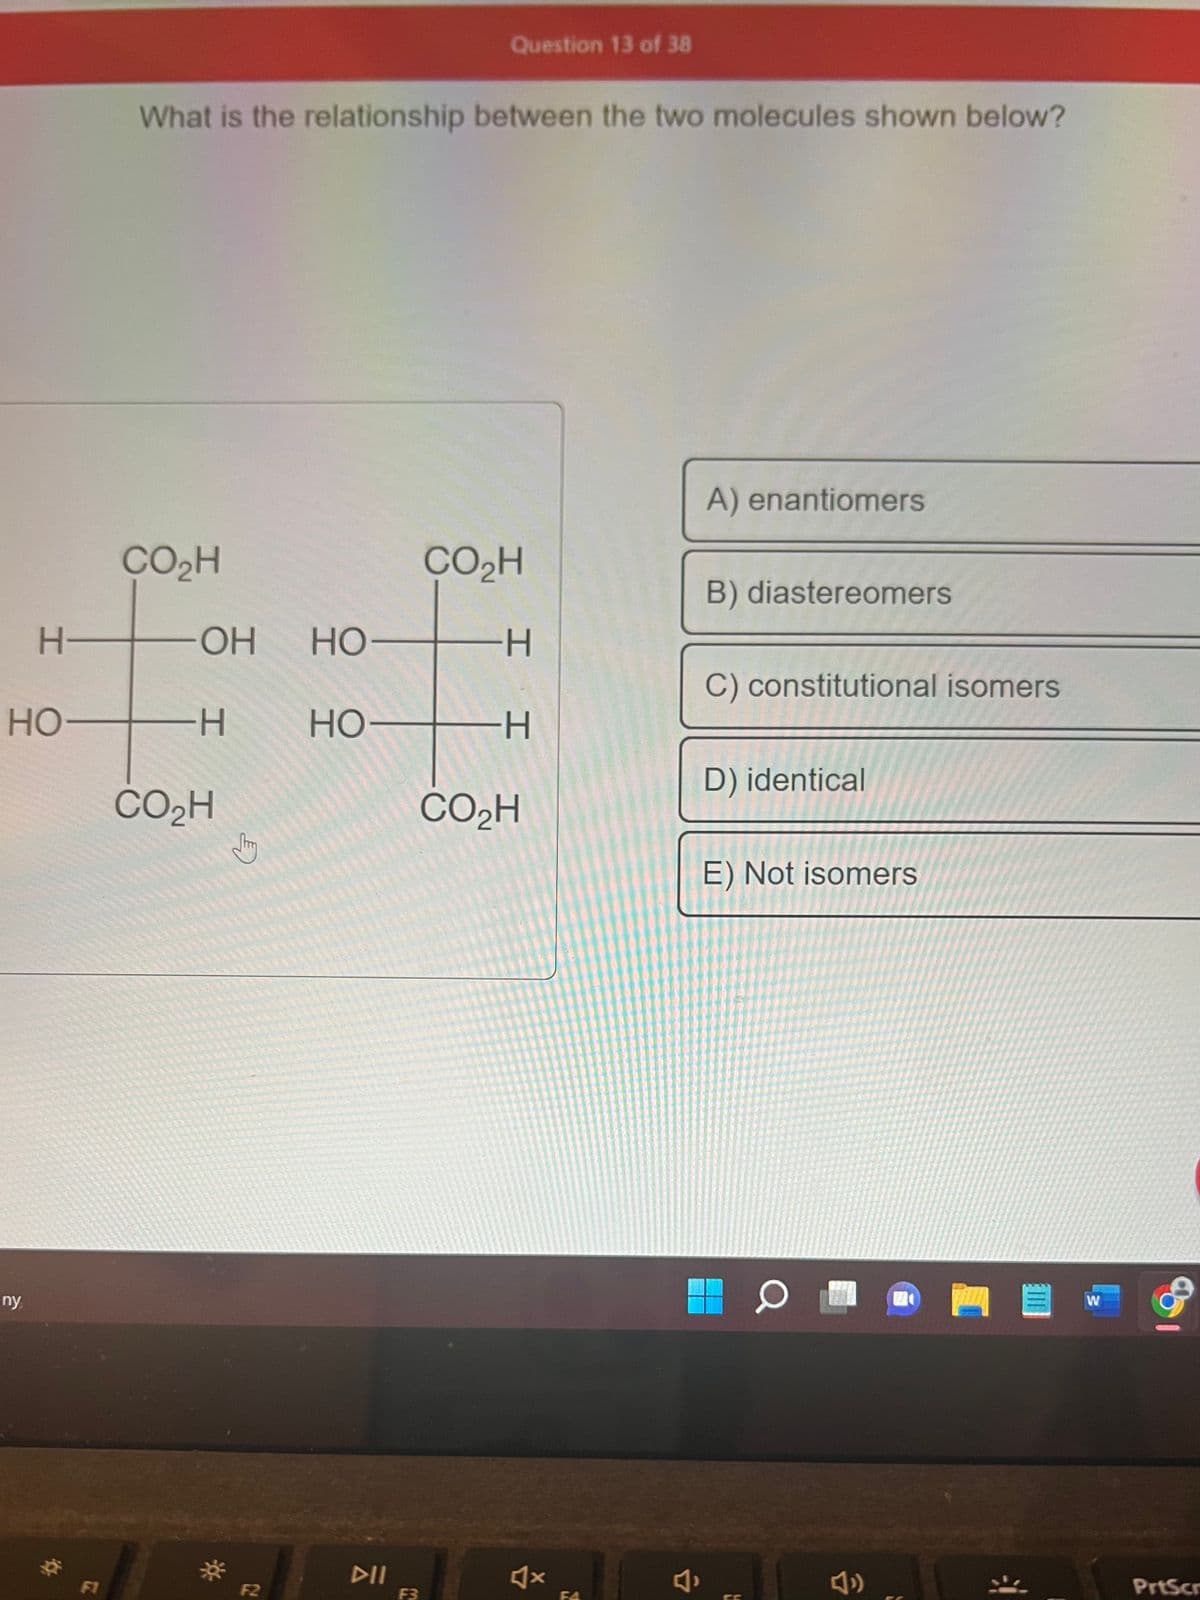 H-
HO
ny
What is the relationship between the two molecules shown below?
CO₂H
-OH HO-
HO-
-H
CO₂H
↓
F2
Question 13 of 38
F3
CO₂H
-H
I
H
CO₂H
F4
A) enantiomers
B) diastereomers
C) constitutional isomers
D) identical
E) Not isomers
O
W
PrtScr